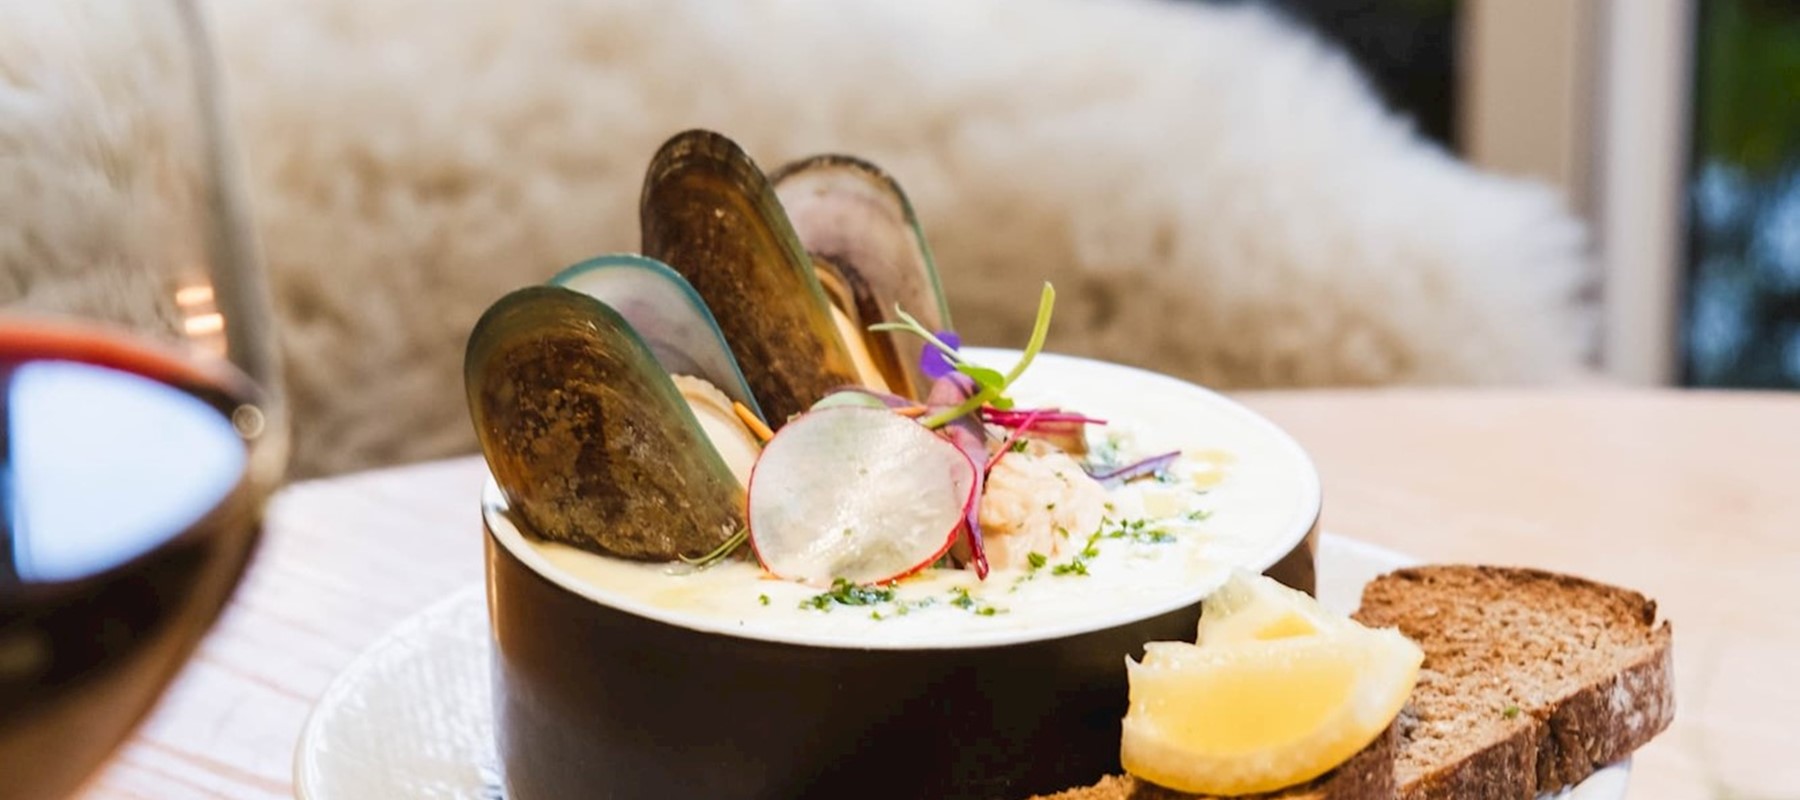 Seafood Chowder, served with a glass of red wine at Pio Pio Restaurant Milford Sound